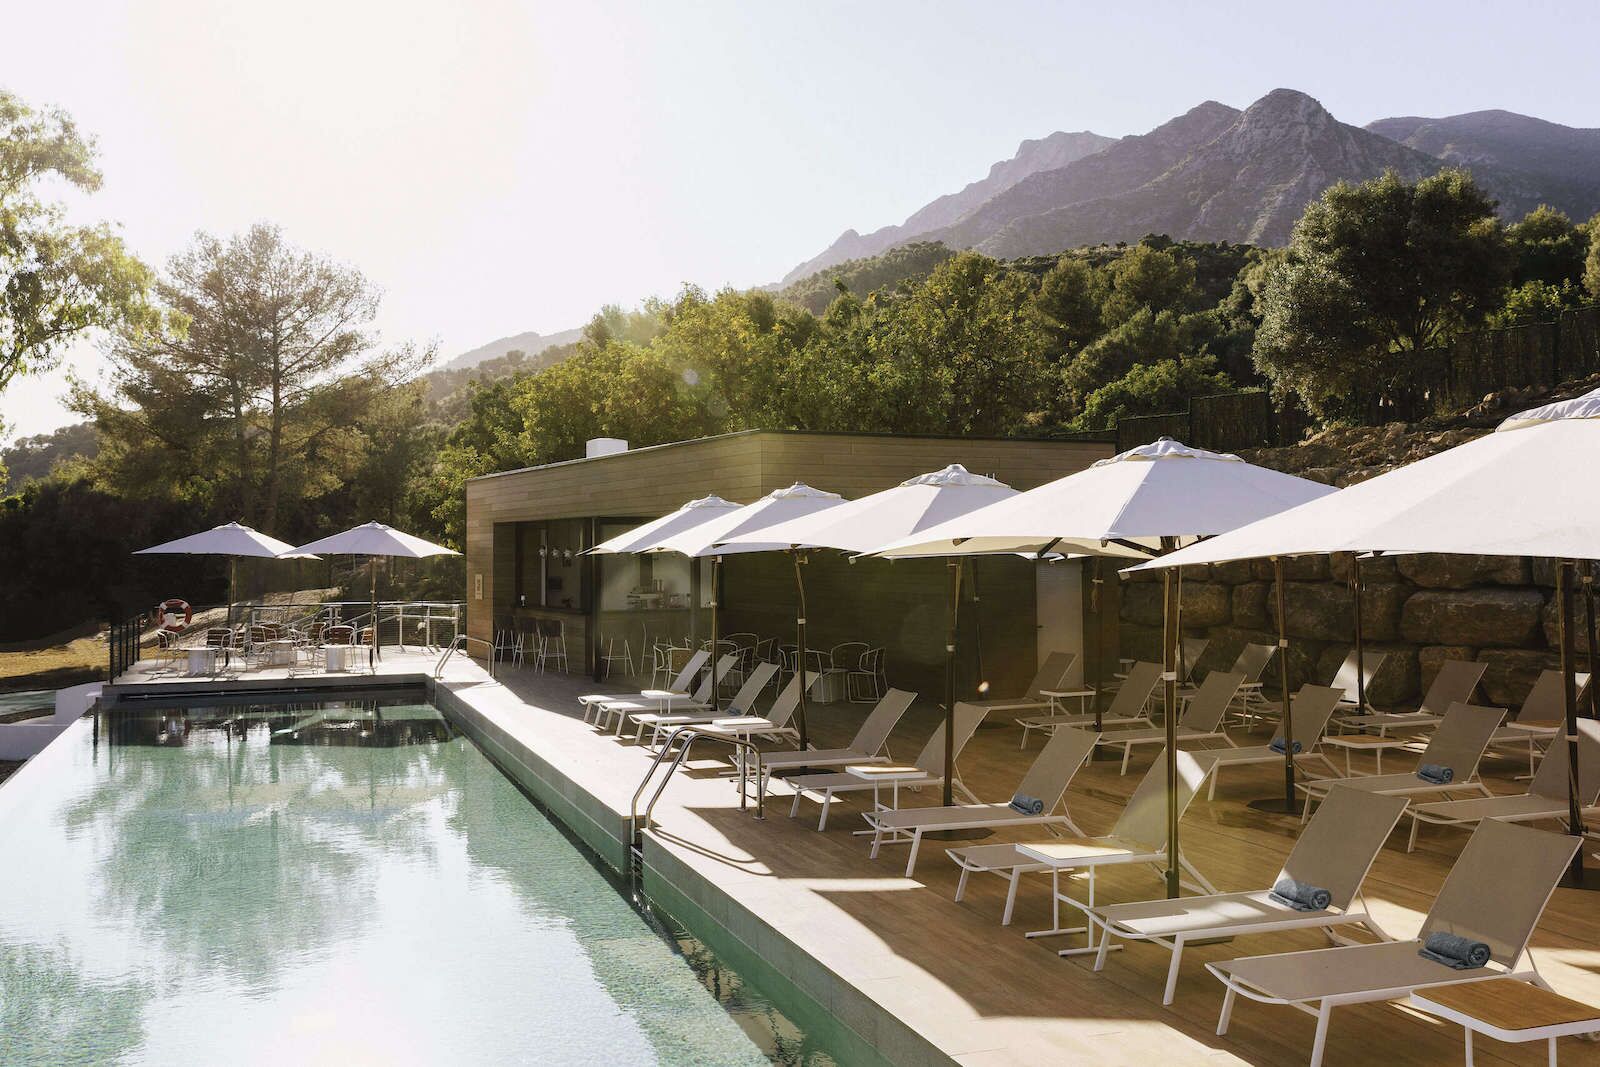 One of the pools at Club Med Magna Marbella with white umbrellas